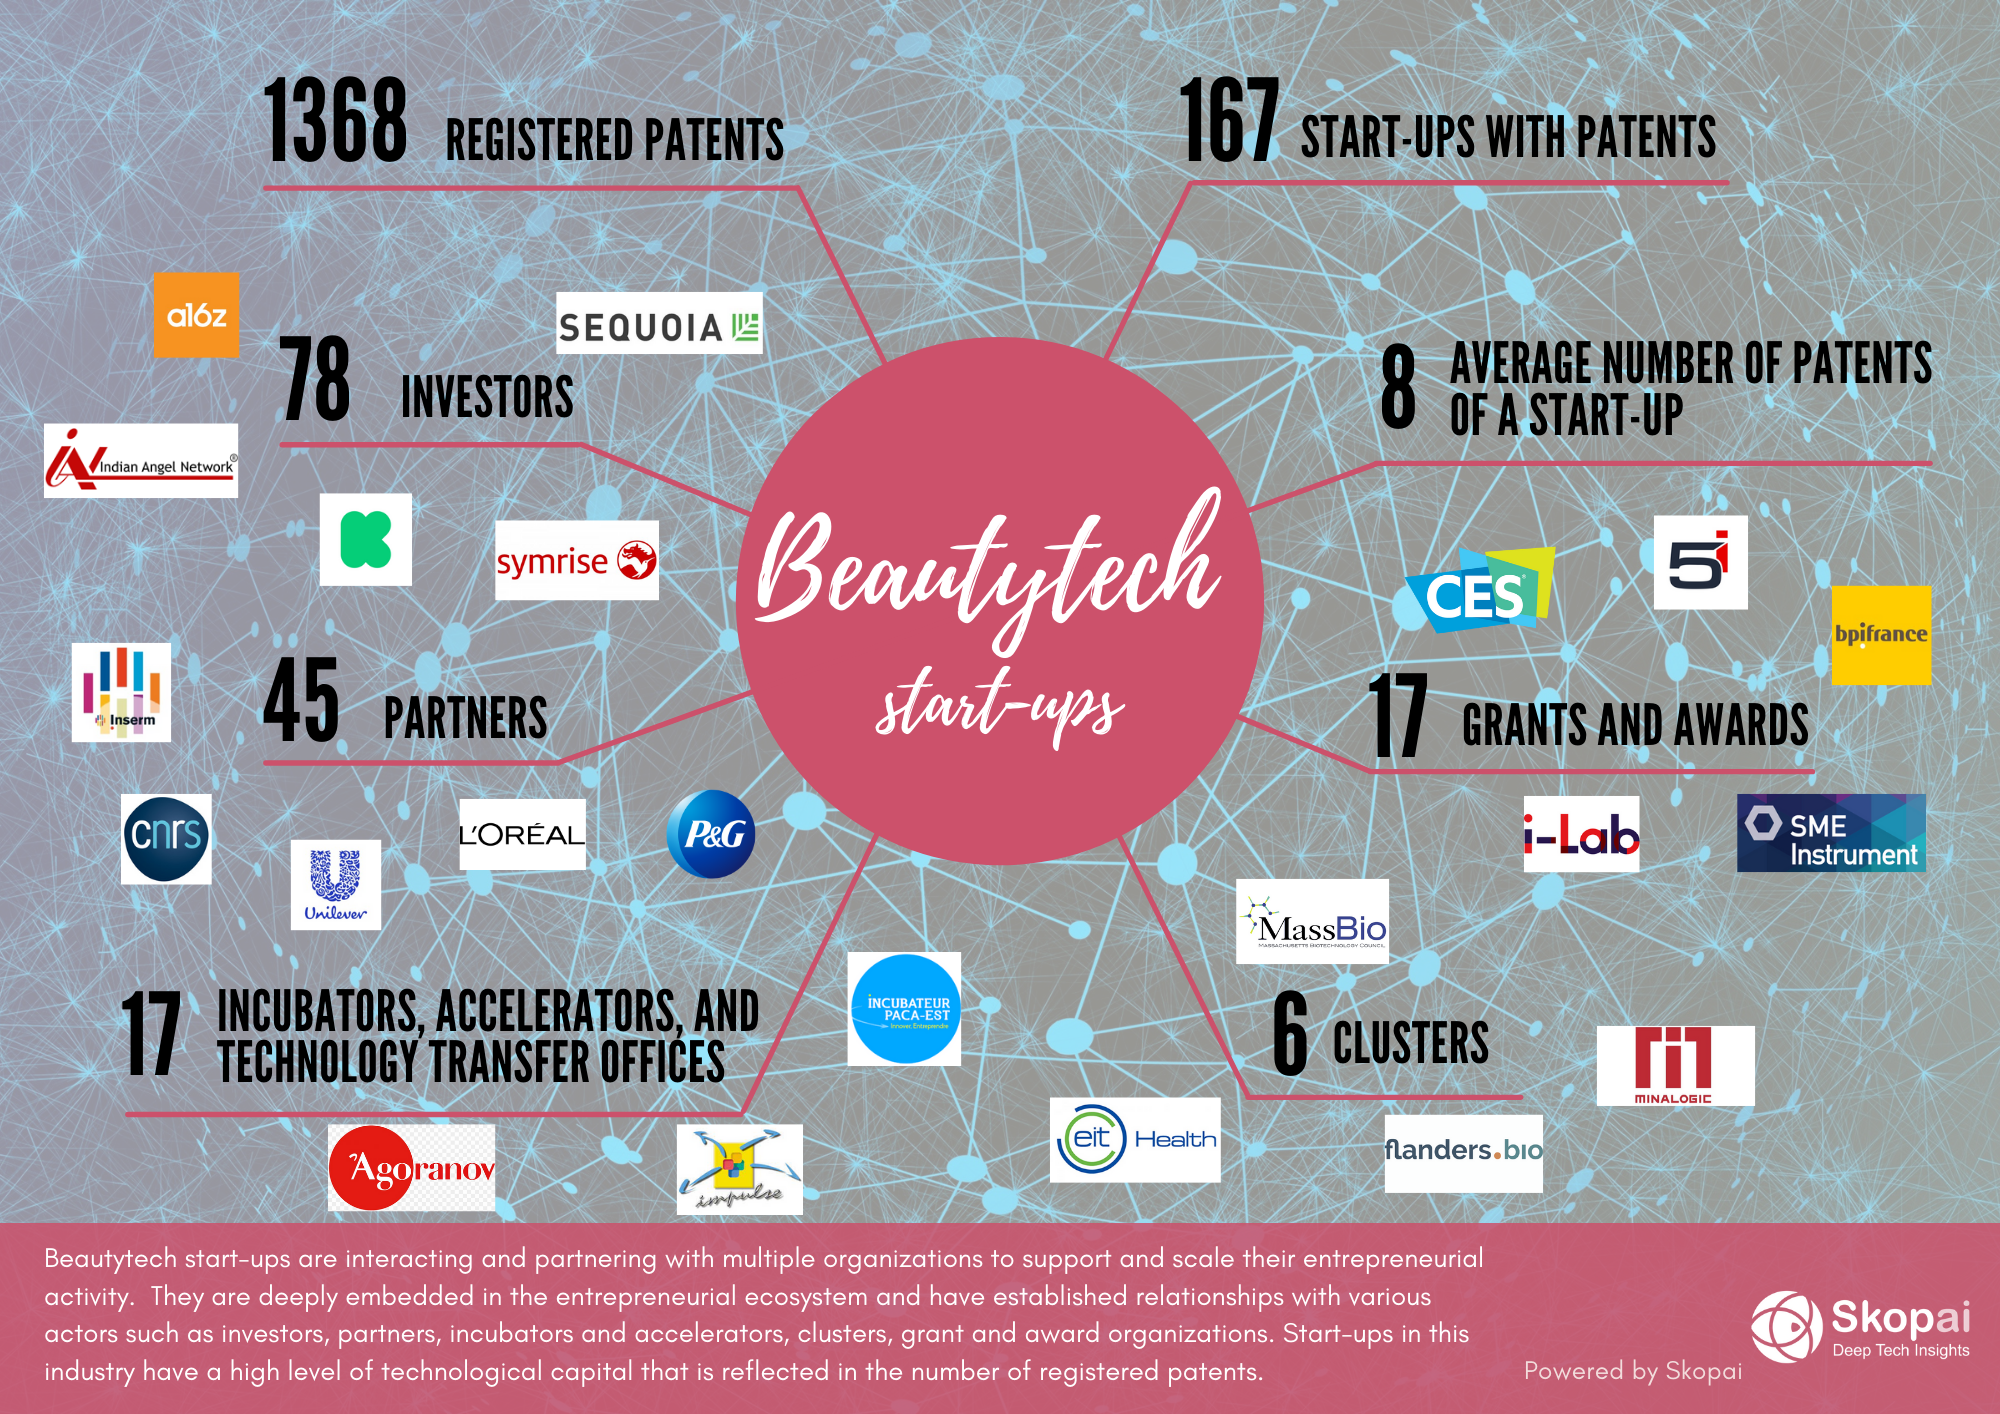 Infographics on beautytech and cosmetics startups